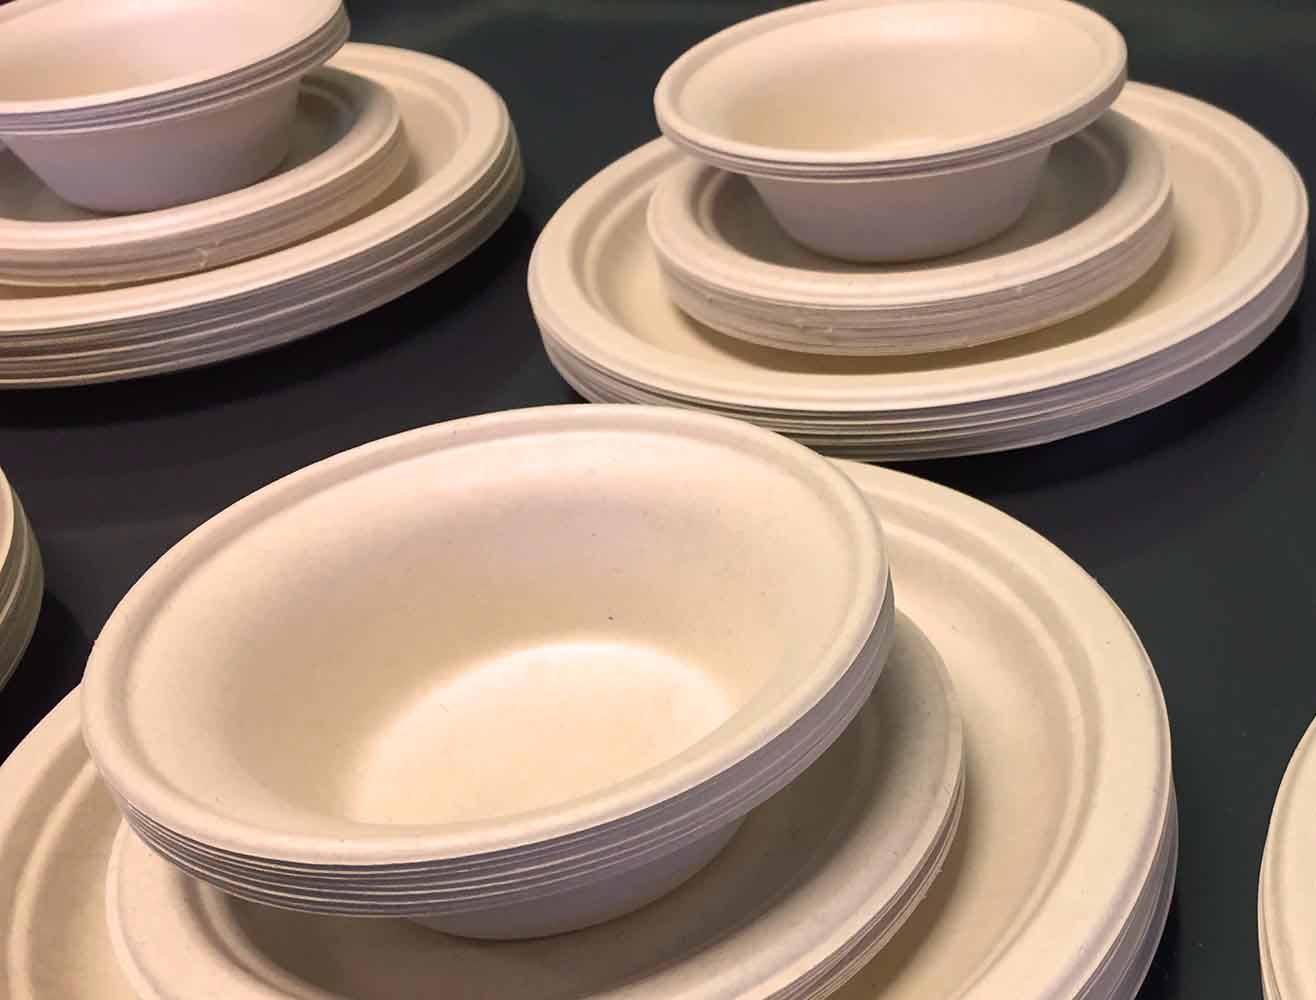 Molded fiber plates and bowls stacked together